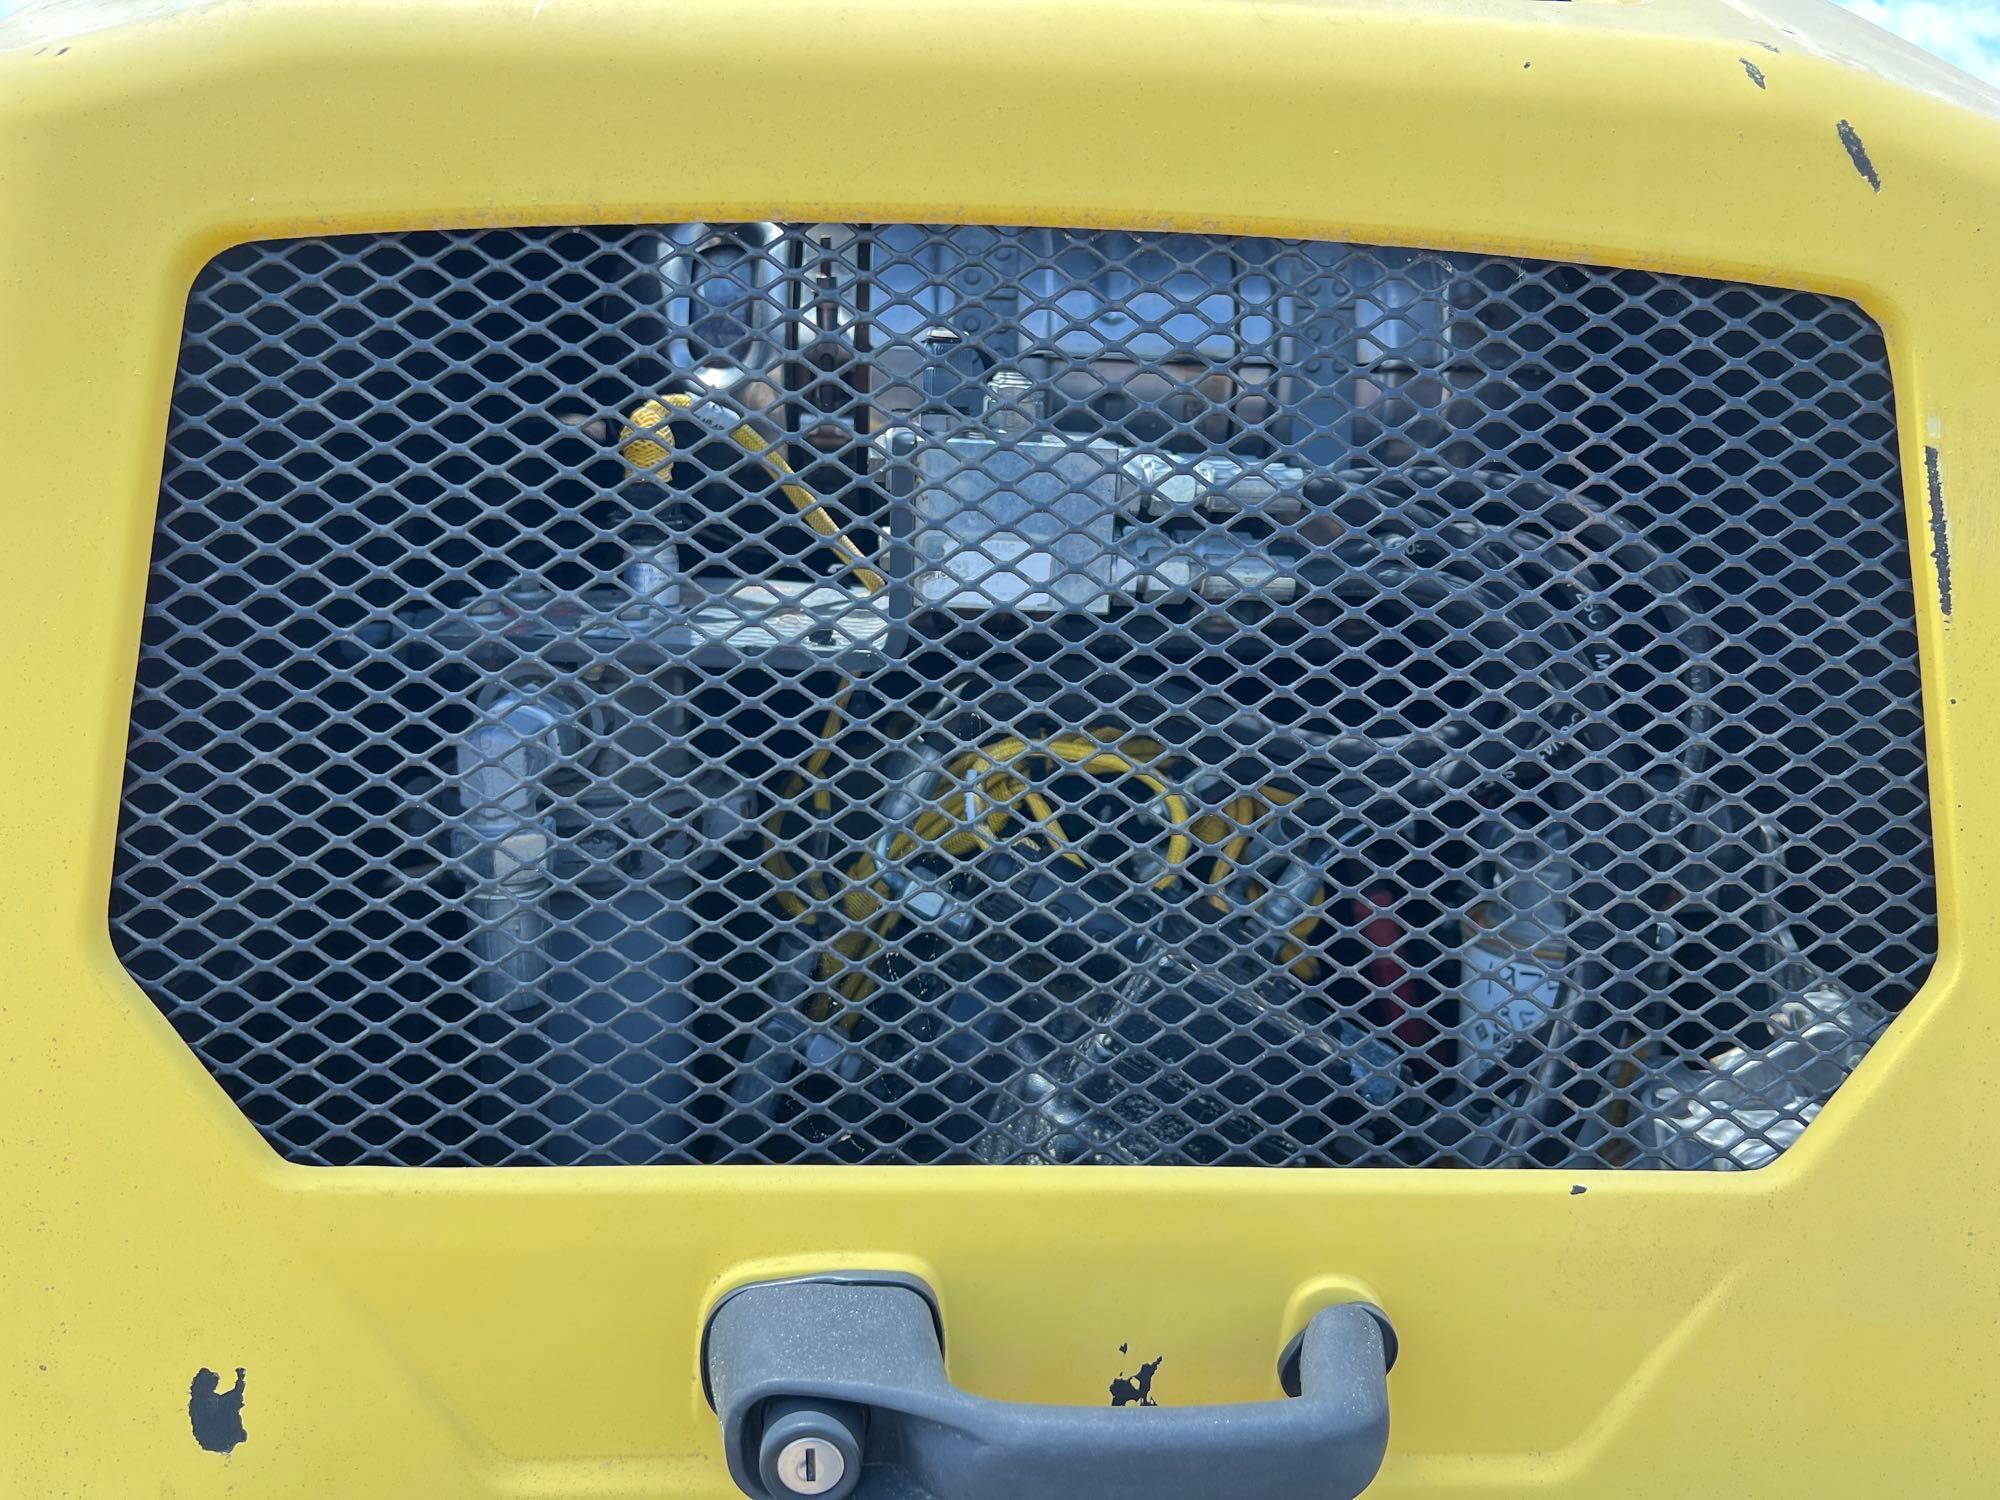 2015 BOMAG BW177D-5 SMOOTH DRUM ROLLER